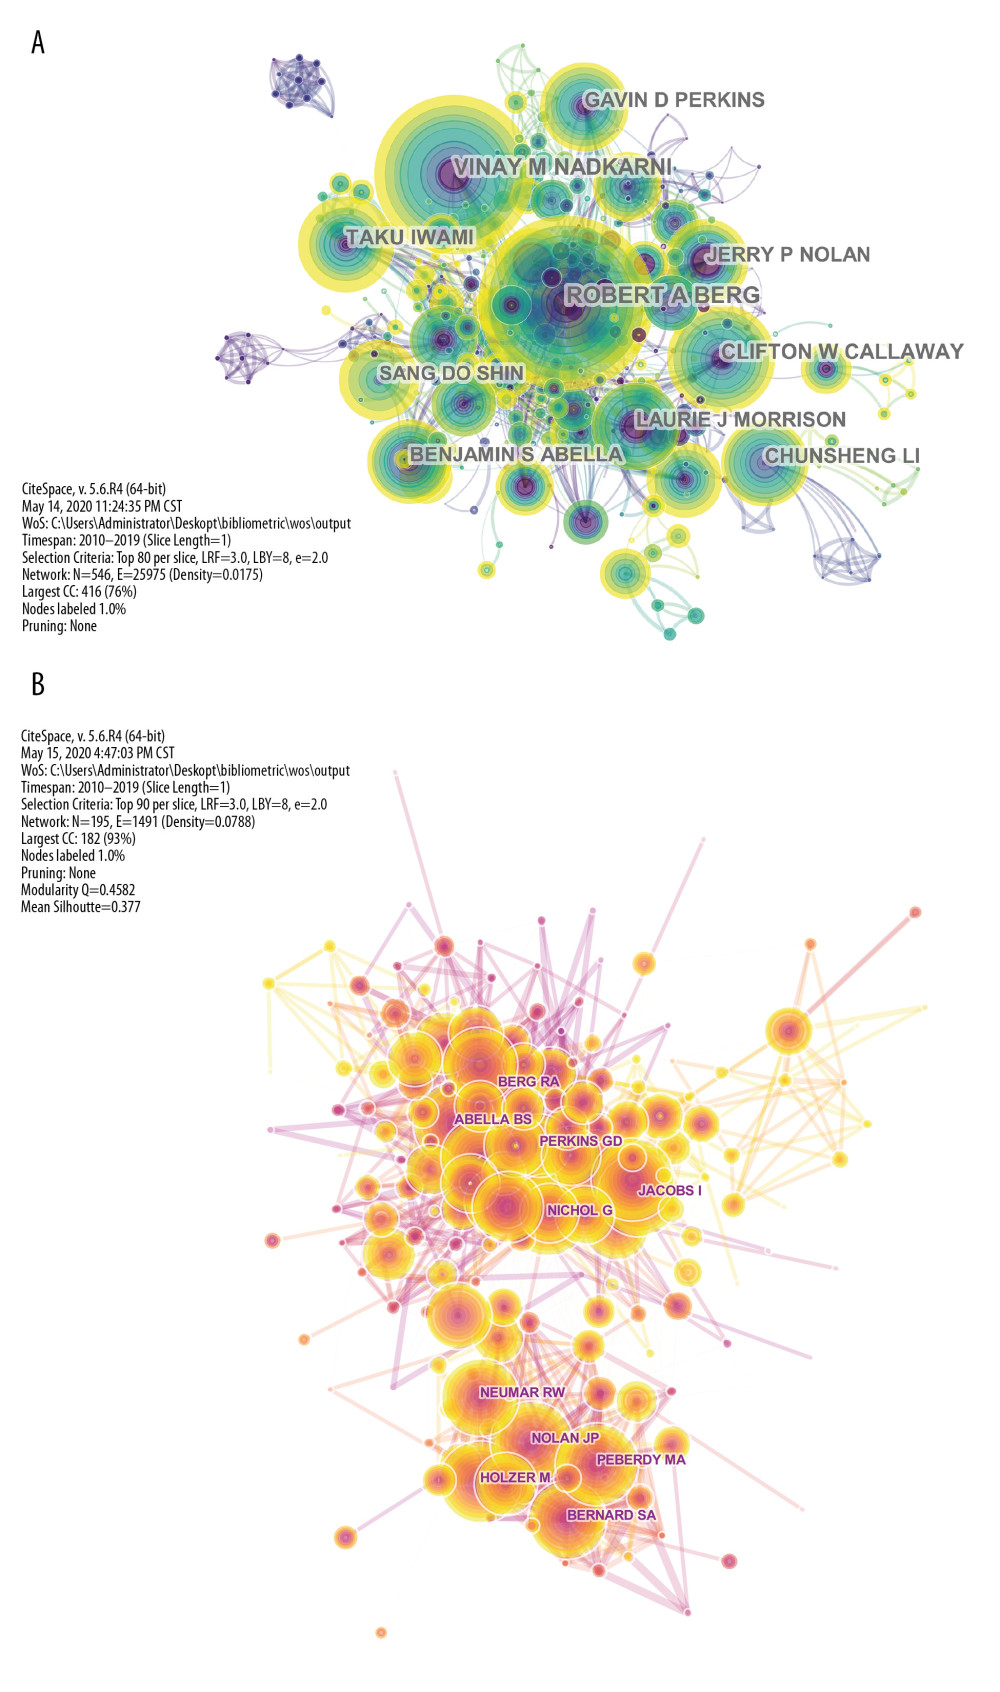 The network map of the most productive authors (A) and the most frequently cited authors (B) who participated in cardiopulmonary resuscitation research.